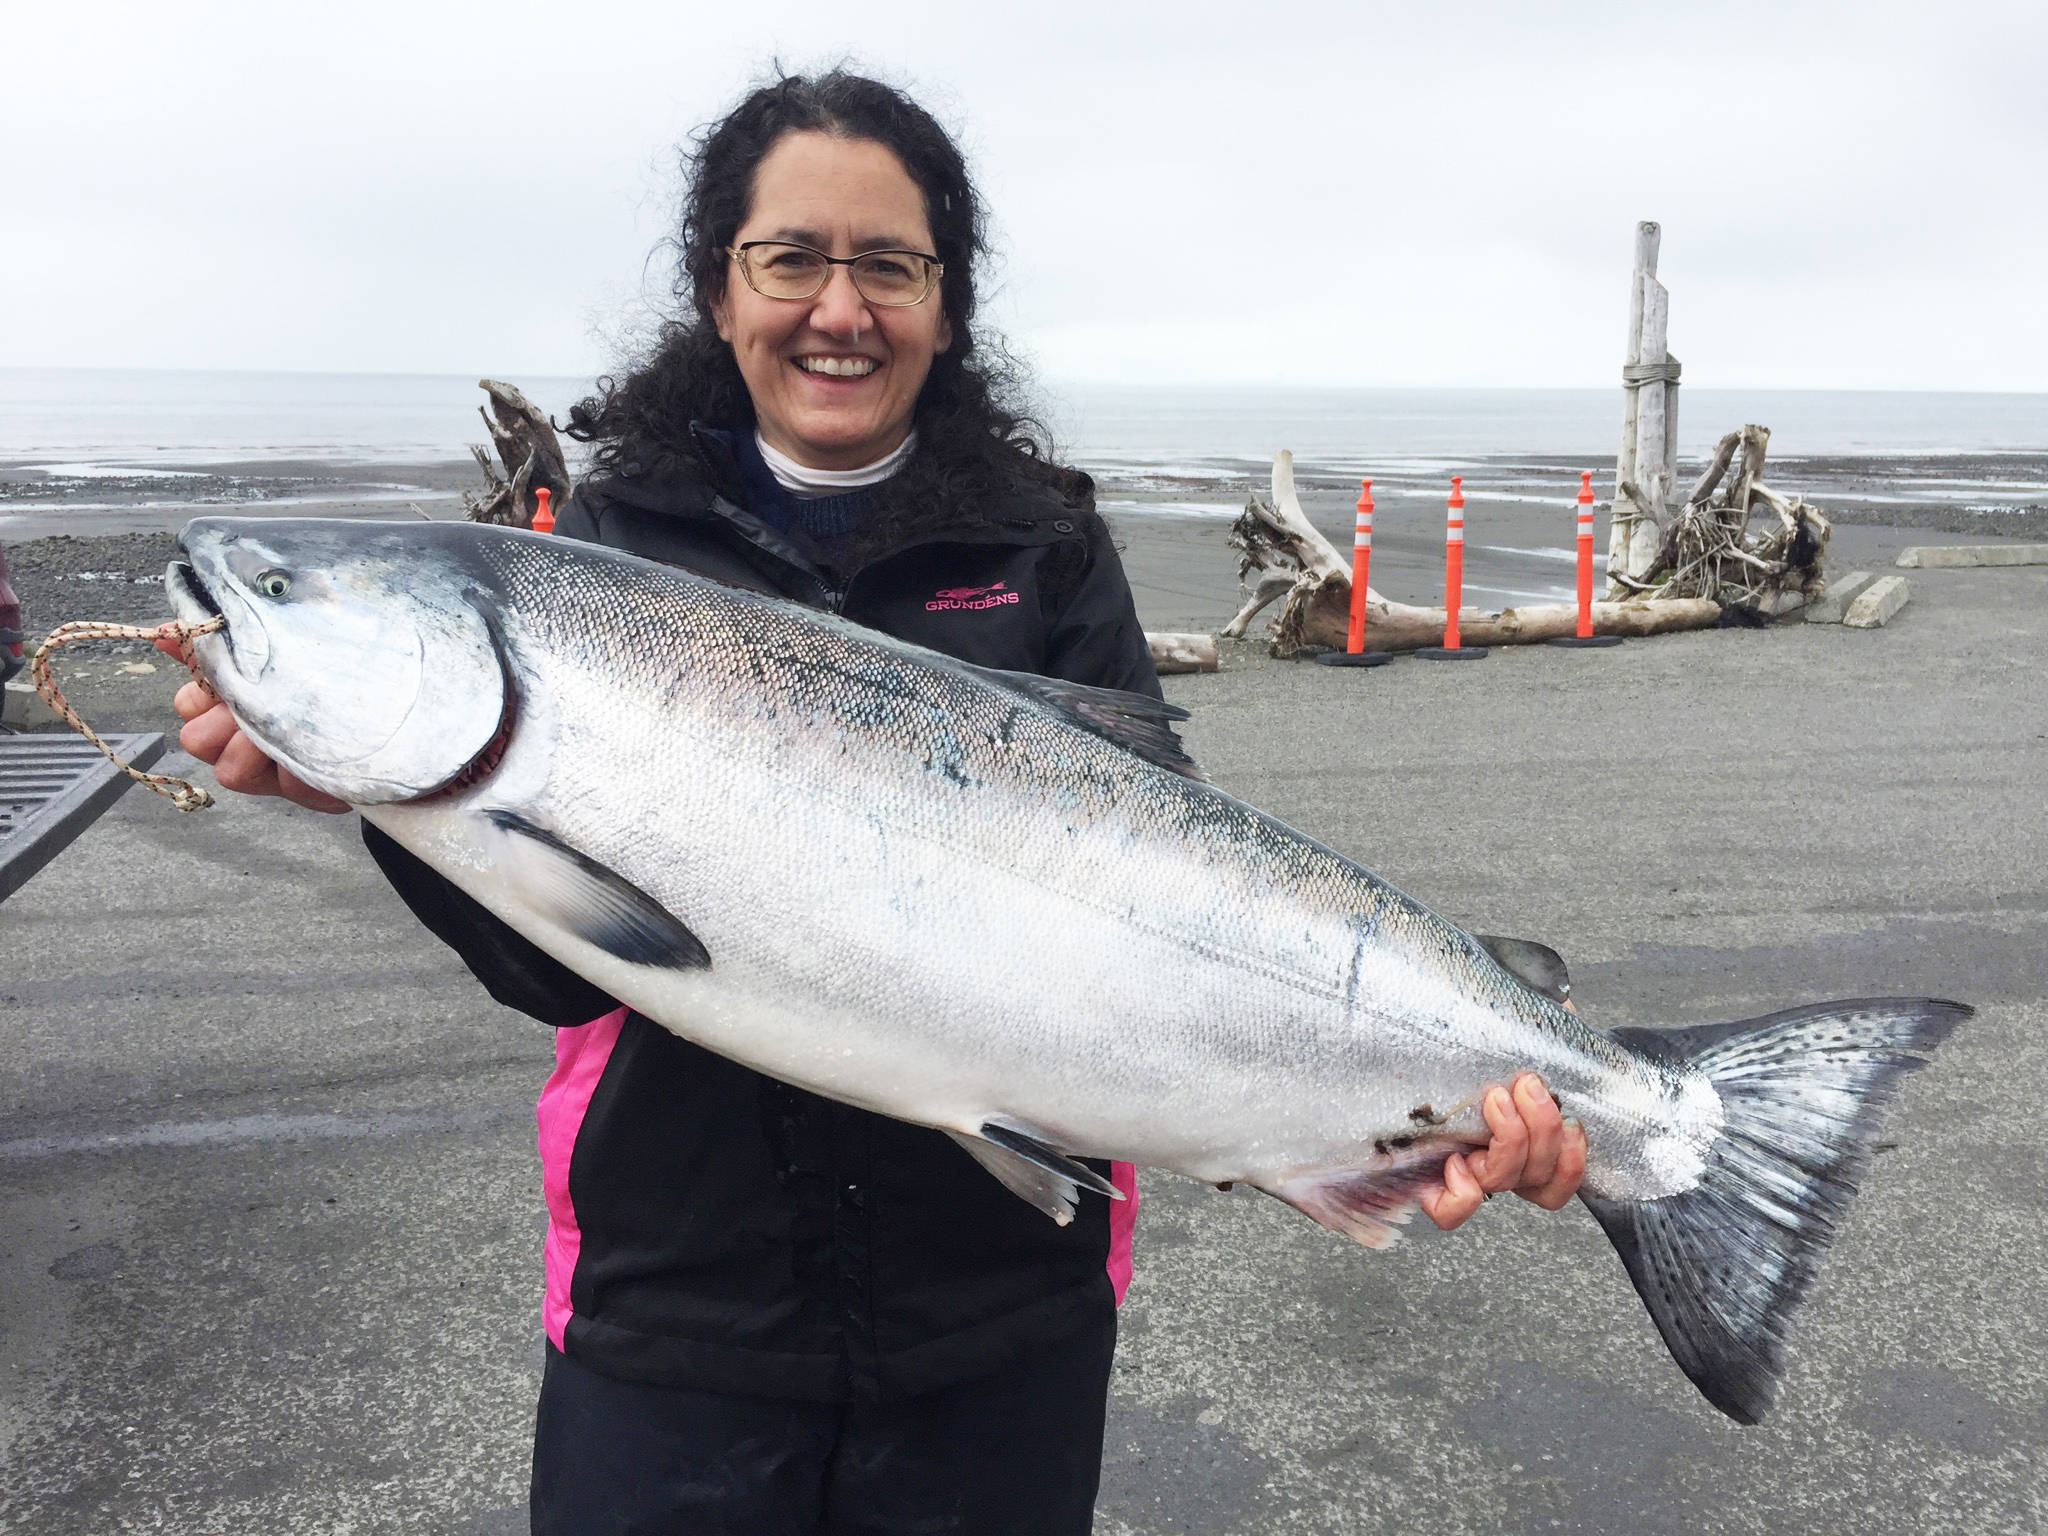 Derotha Ferraro from the fishing vessel Big Game poses with the king salmon she caught at the Anchor Point King Salmon Calcutta on Sunday, May 12, 2019, in Anchor Point, Alaska. Ferraro’s fish was one of the top ten fish caught in the tournament, weighing more than 20 pounds. (Photo courtesy of Bill Scott)